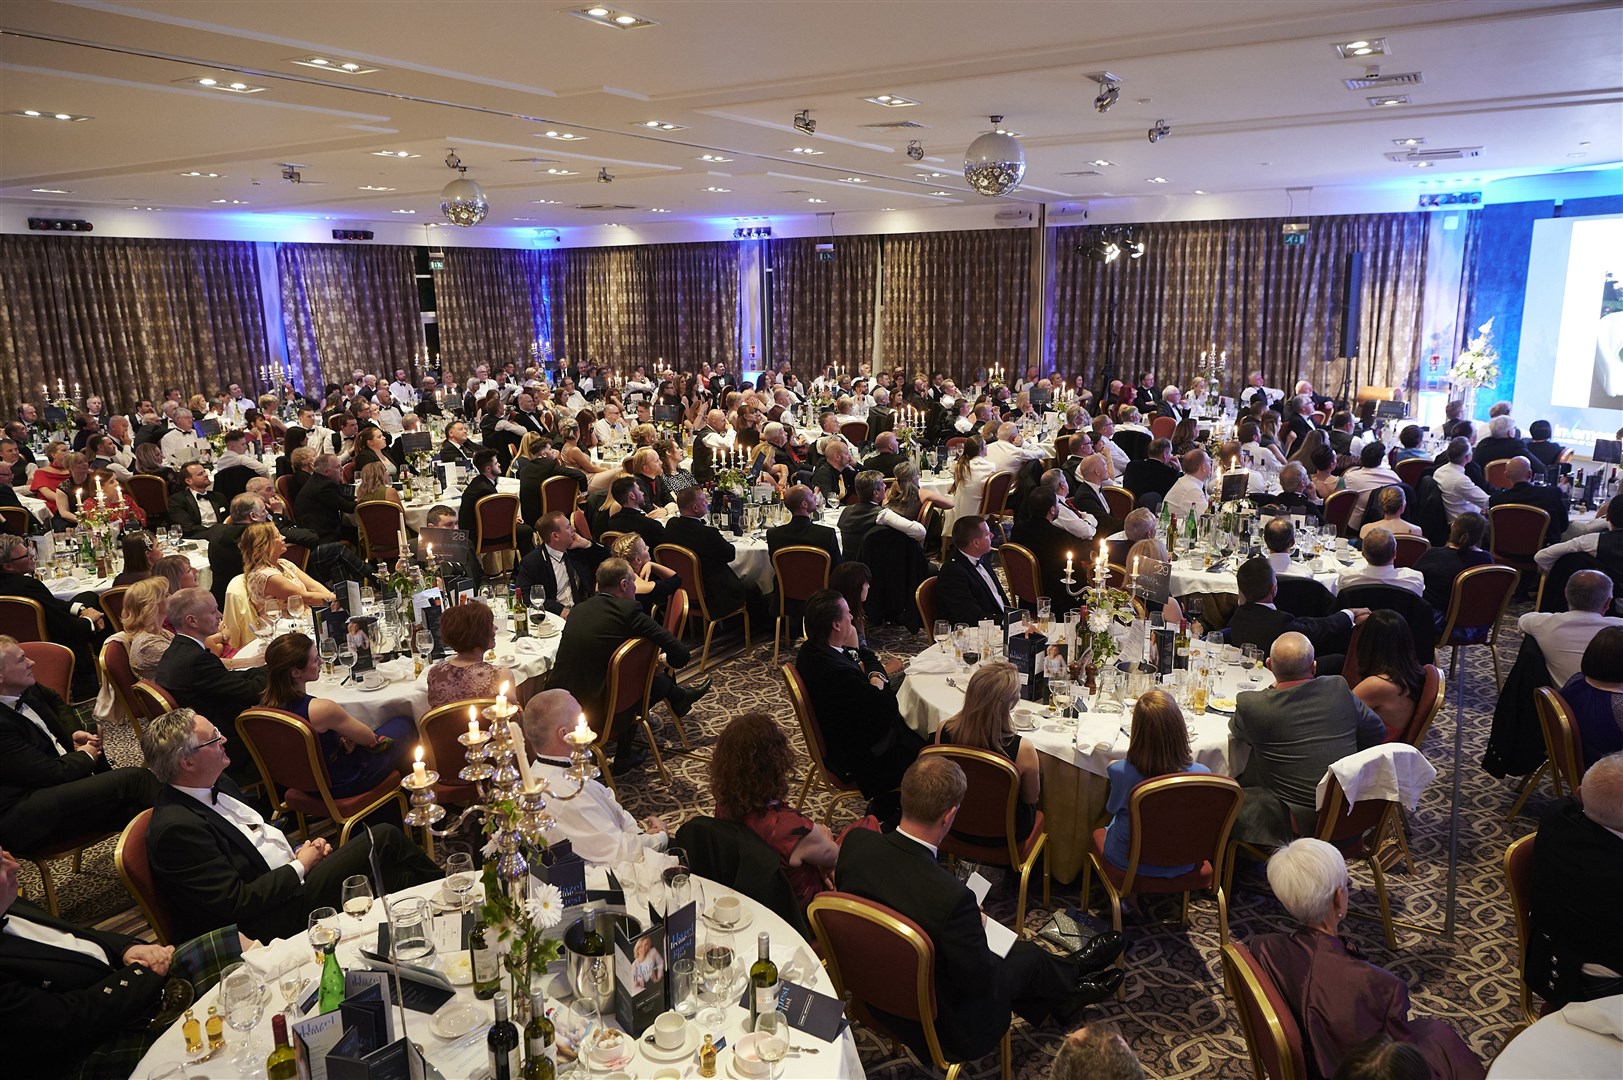 The Highland Business Dinner was last held pre-pandemic in 2019.